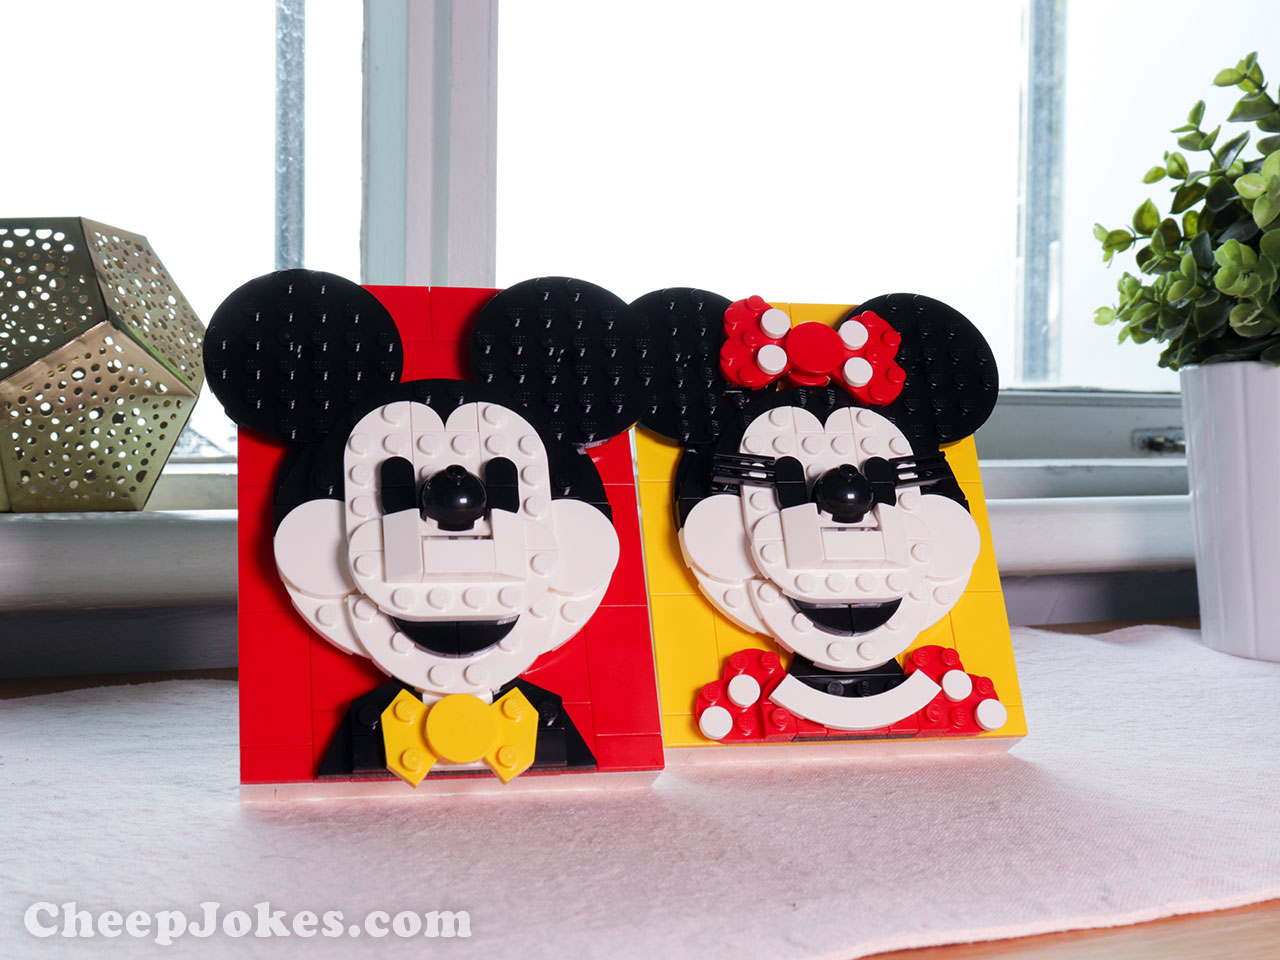 Fans of Disney’s iconic characters can build and display their own Mickey & Minnie Mouse illustration with this LEGO® Brick Sketches™ kit. Hang it on the wall using the built-in hook – the 12x16 baseplate holds the LEGO bricks firmly in place – or stand it on a shelf. It’s a perfect gift for birthdays, holidays or other celebrations and an impressive addition to any collection of LEGO Brick Sketches character portraits.